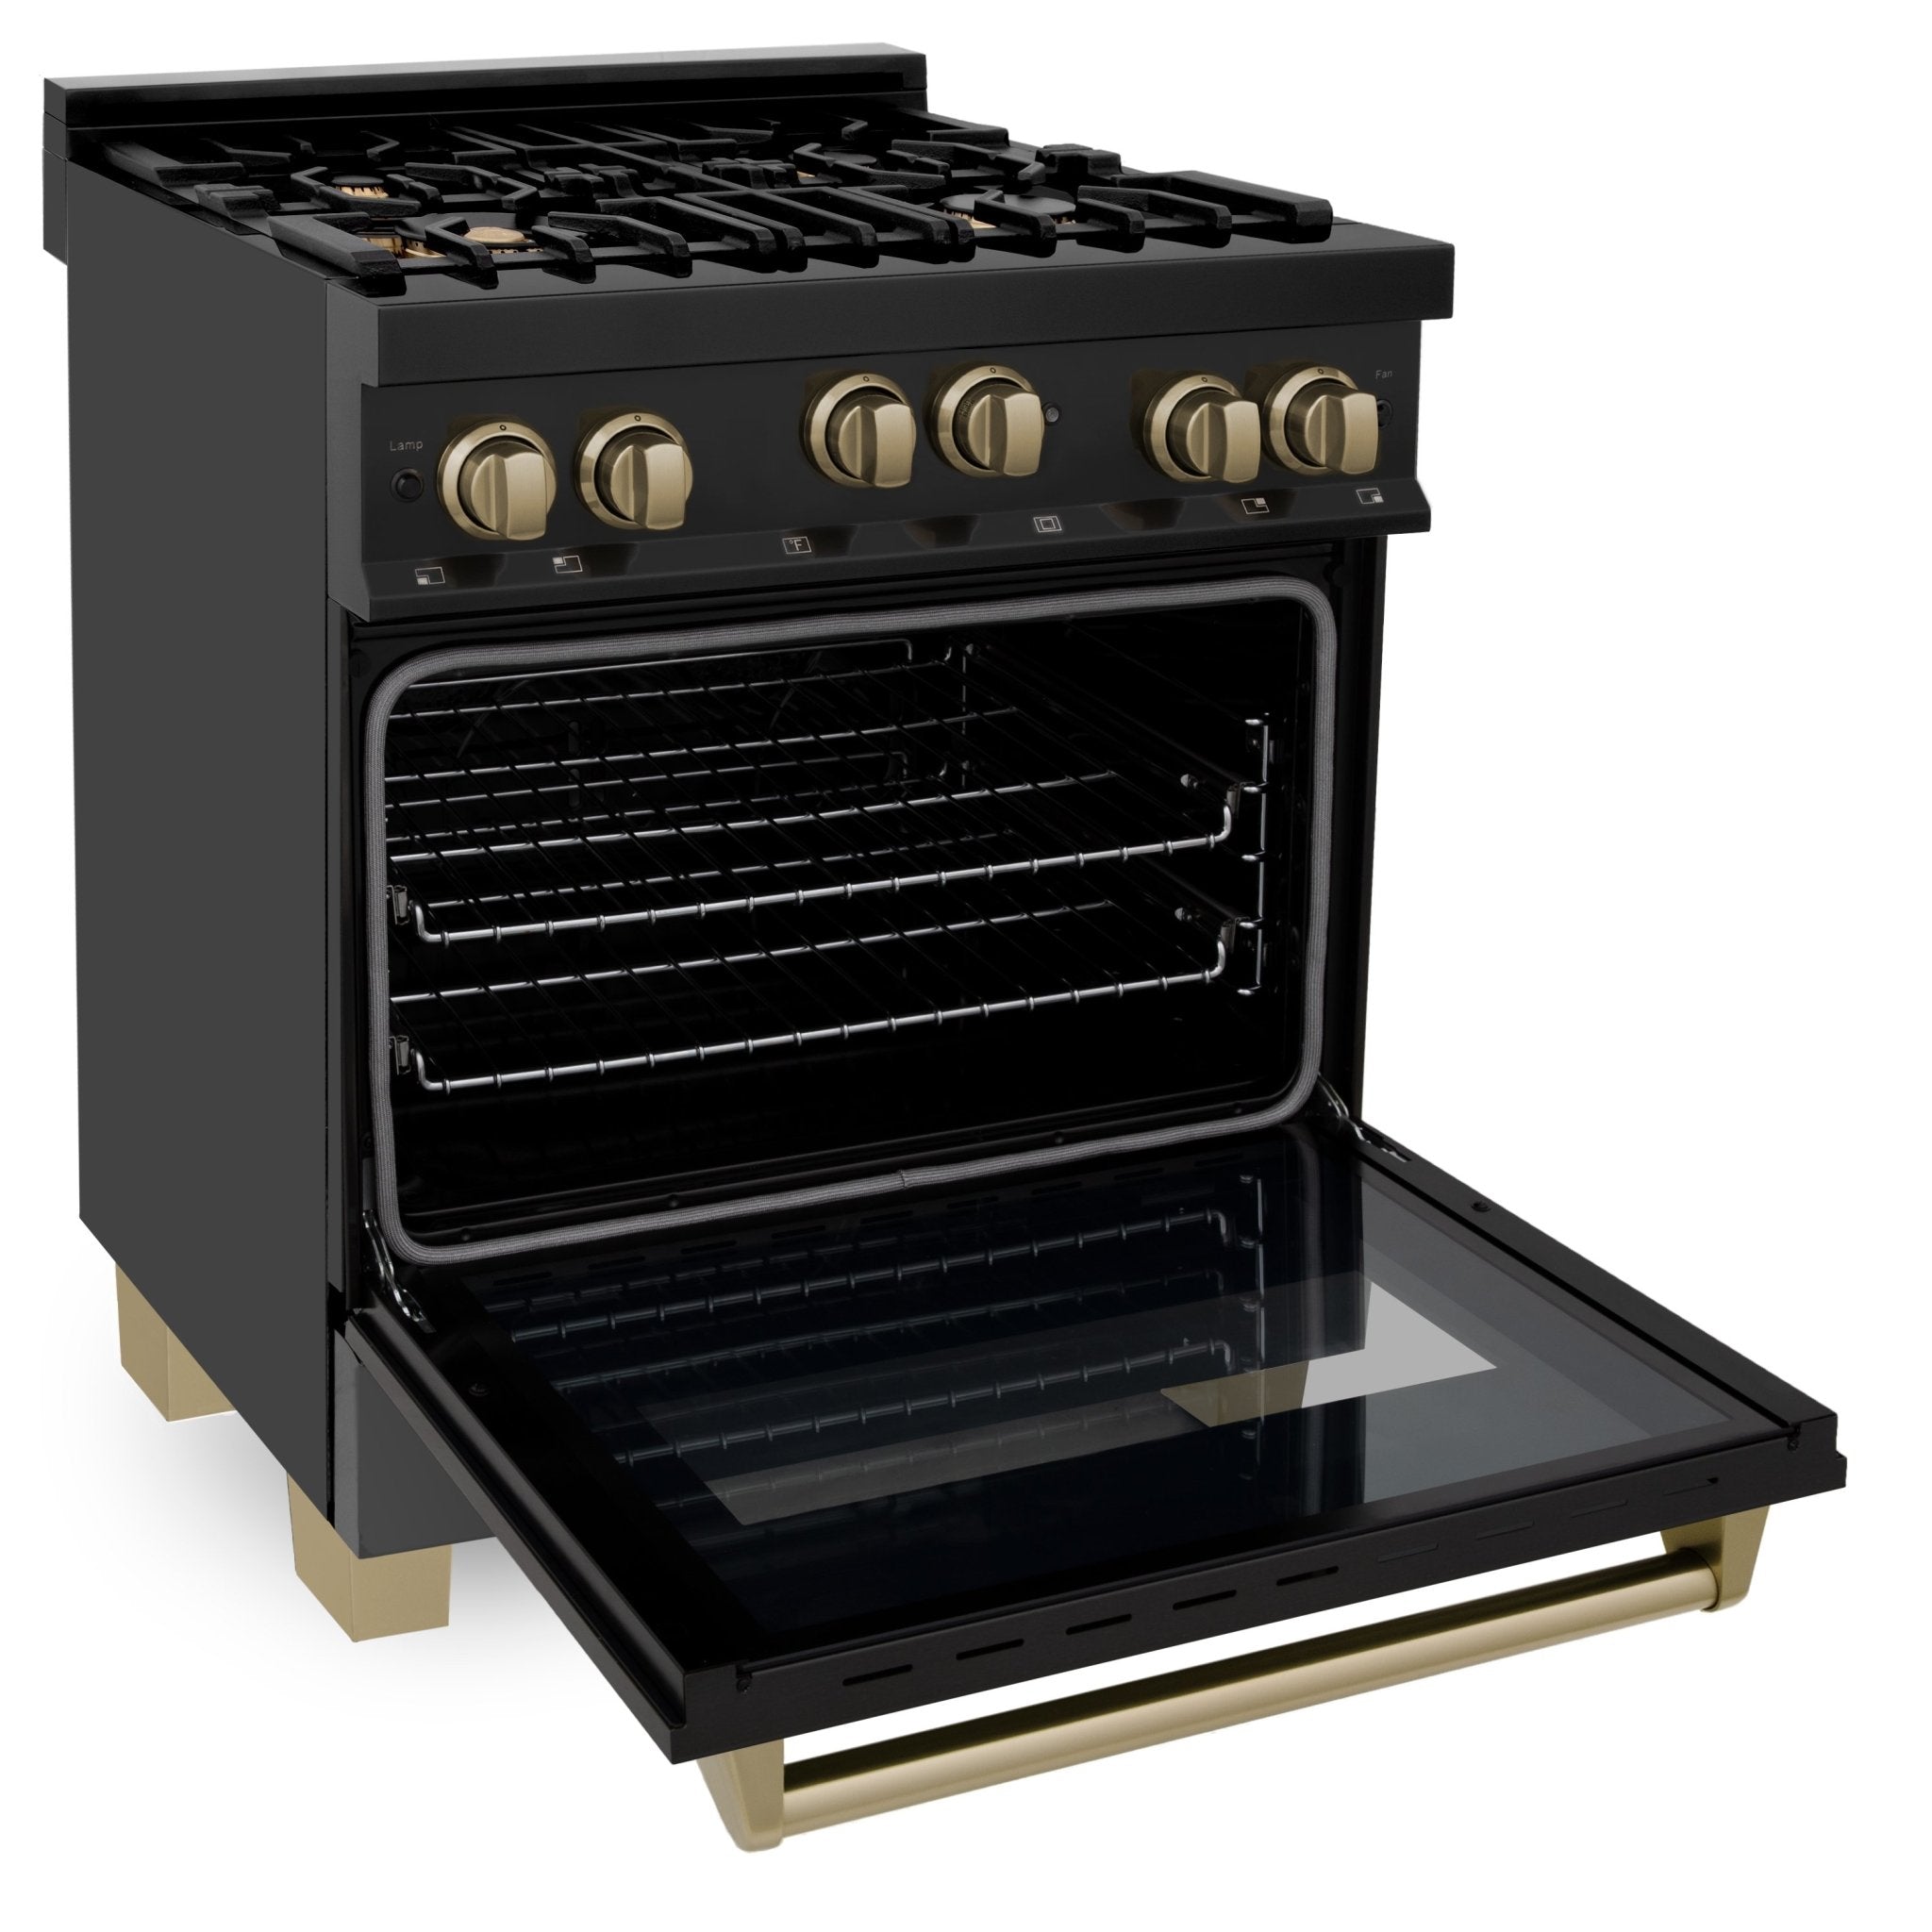 ZLINE Autograph Edition 30" 4.0 cu. ft. Range with Gas Stove and Gas Oven in Black Stainless Steel with Accents (RGBZ-30) - Rustic Kitchen & Bath - Ranges - ZLINE Kitchen and Bath